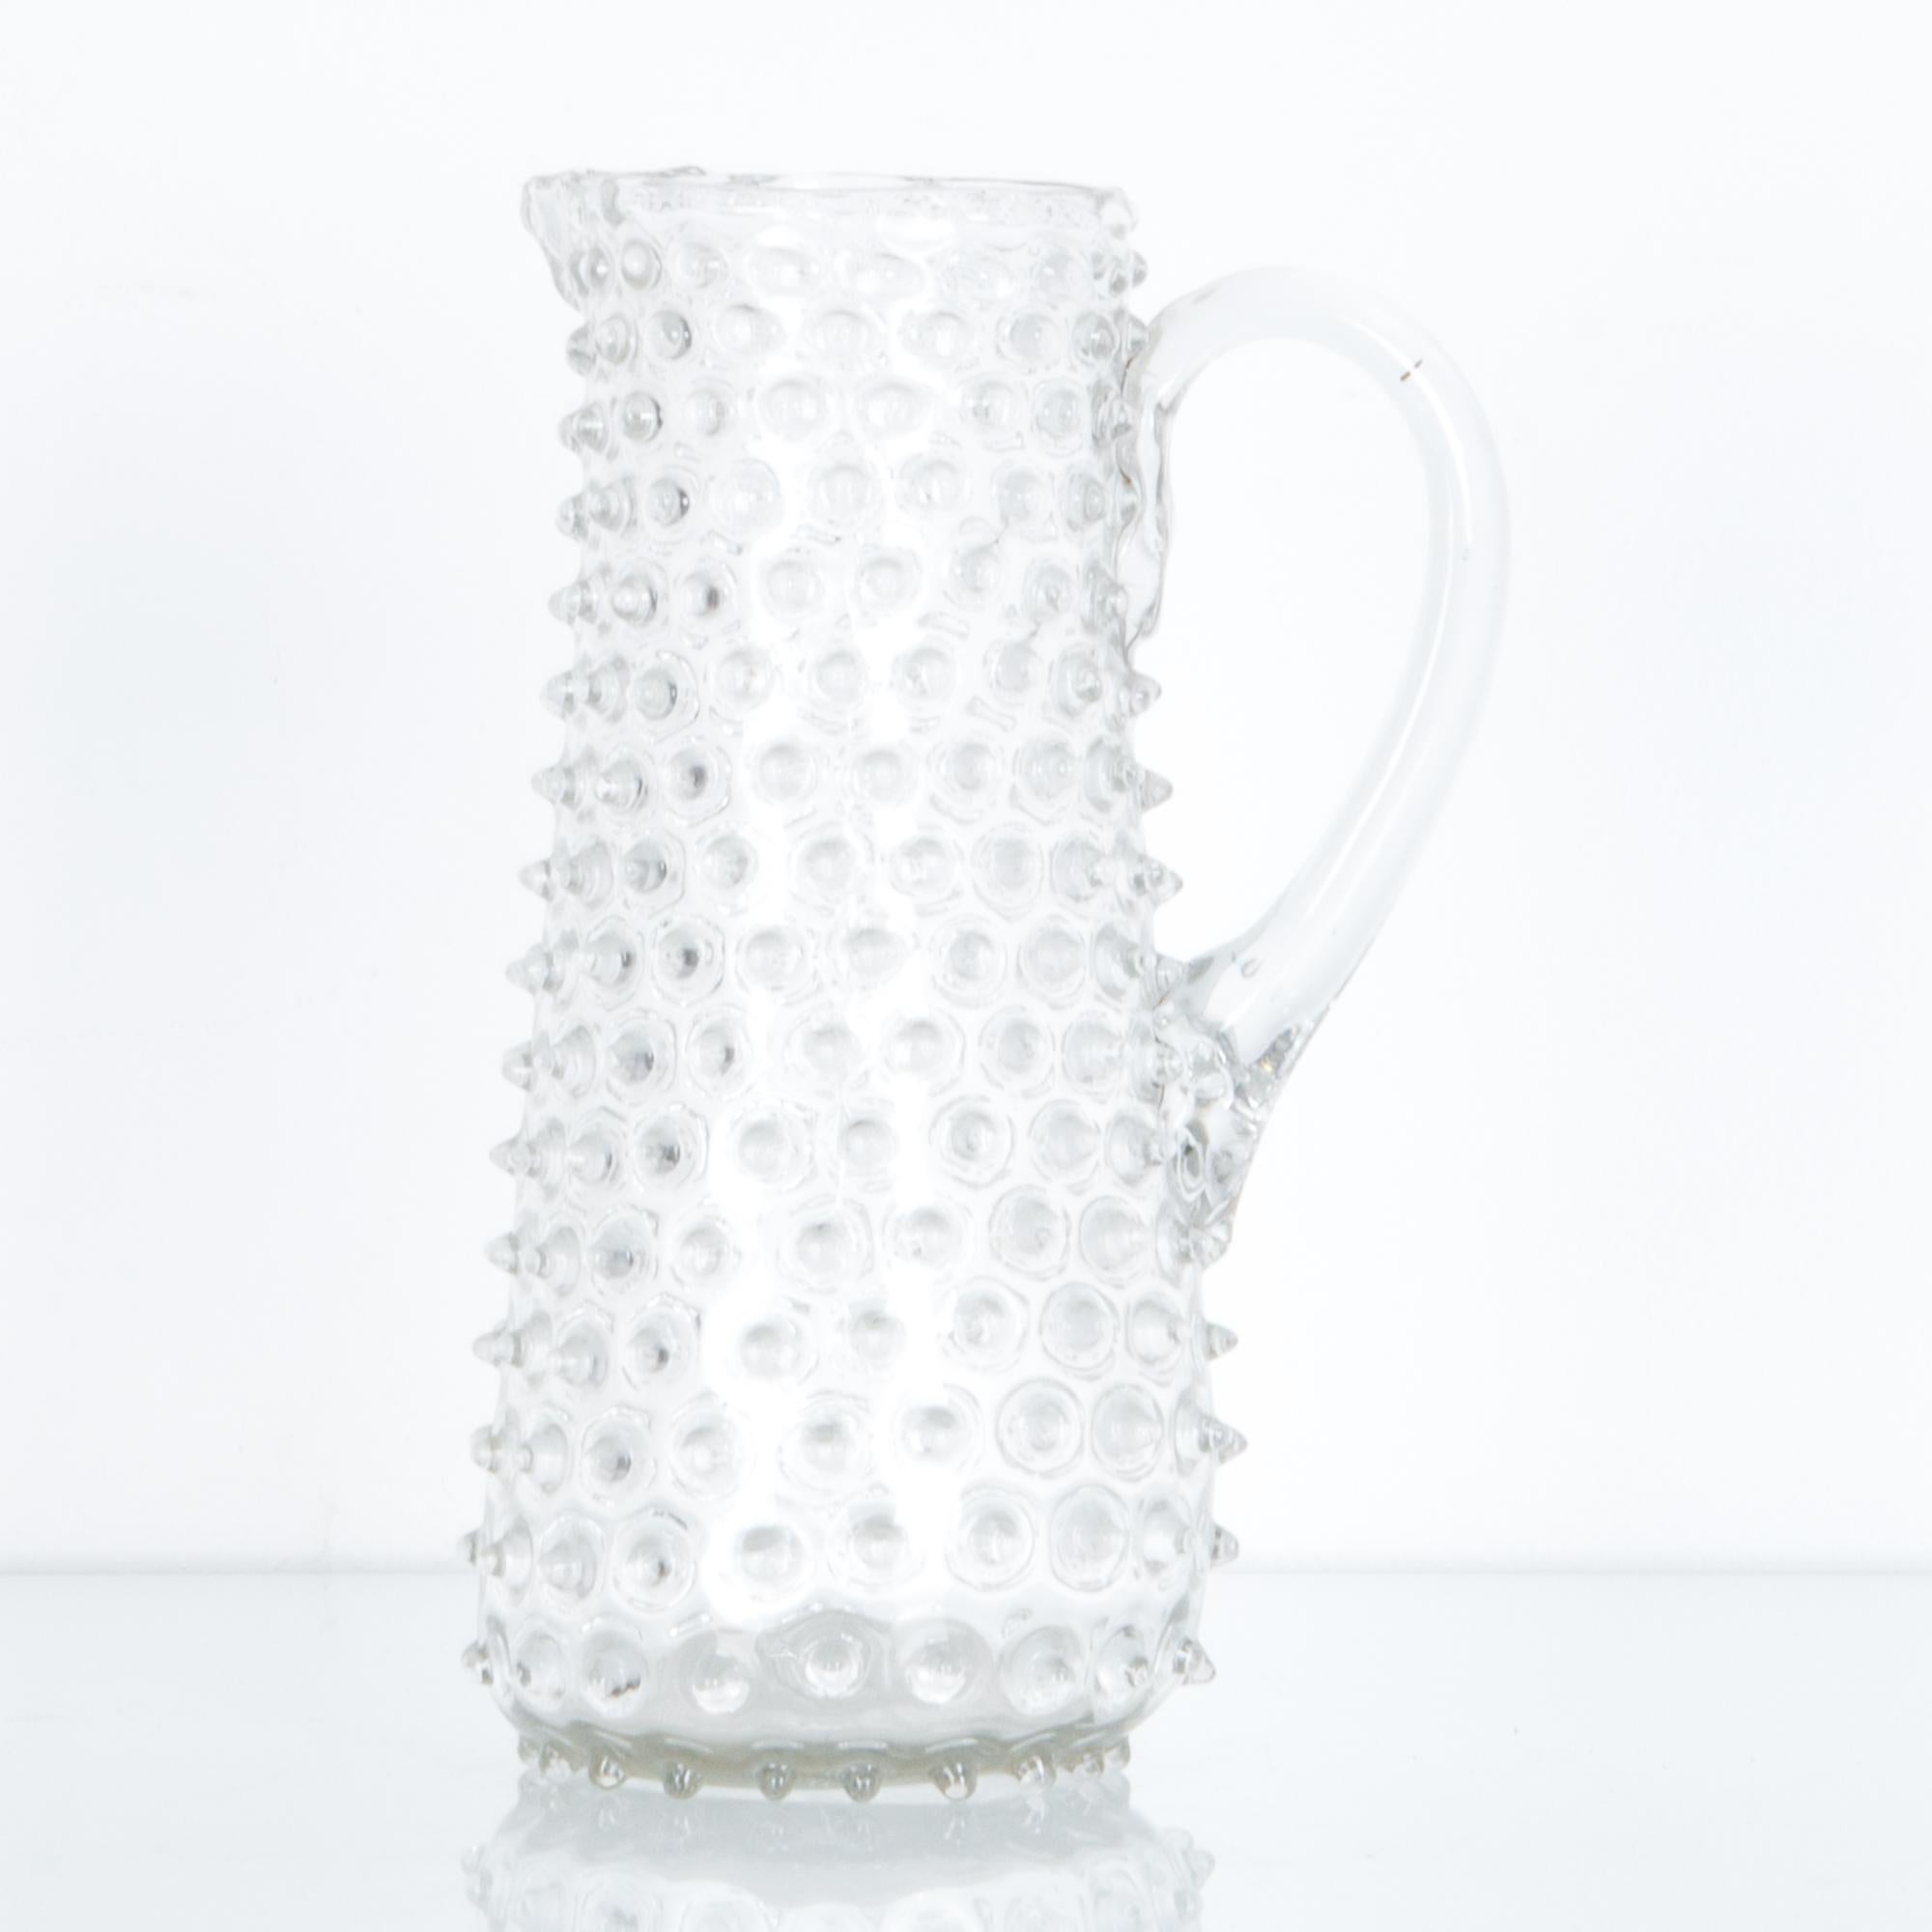 A decorative 11” pitcher from Belgium, circa 1800. A distinctive regional style from Liege glass factories of the period. Exquisitely crafted by traditional glassblowers, the textured surfaced is dotted with raised bumps of glass, a graphic network